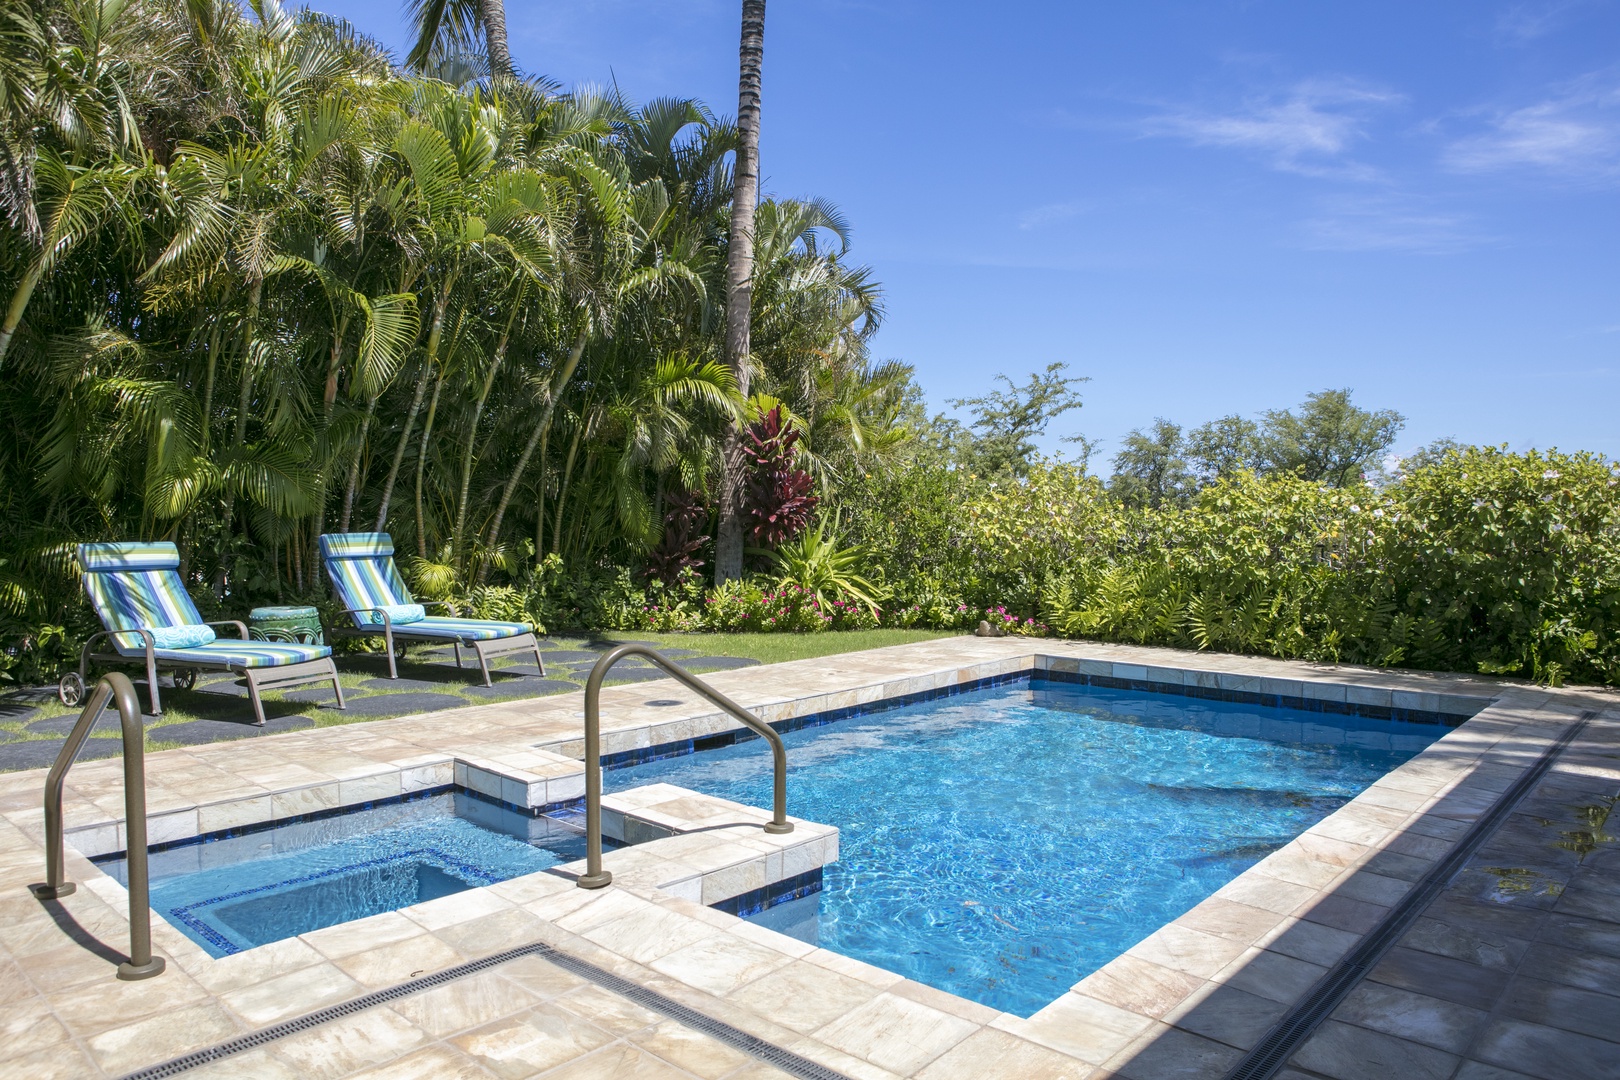 Kamuela Vacation Rentals, Villages at Mauna Lani Resort Unit # 728 - Your own private pool and spa!